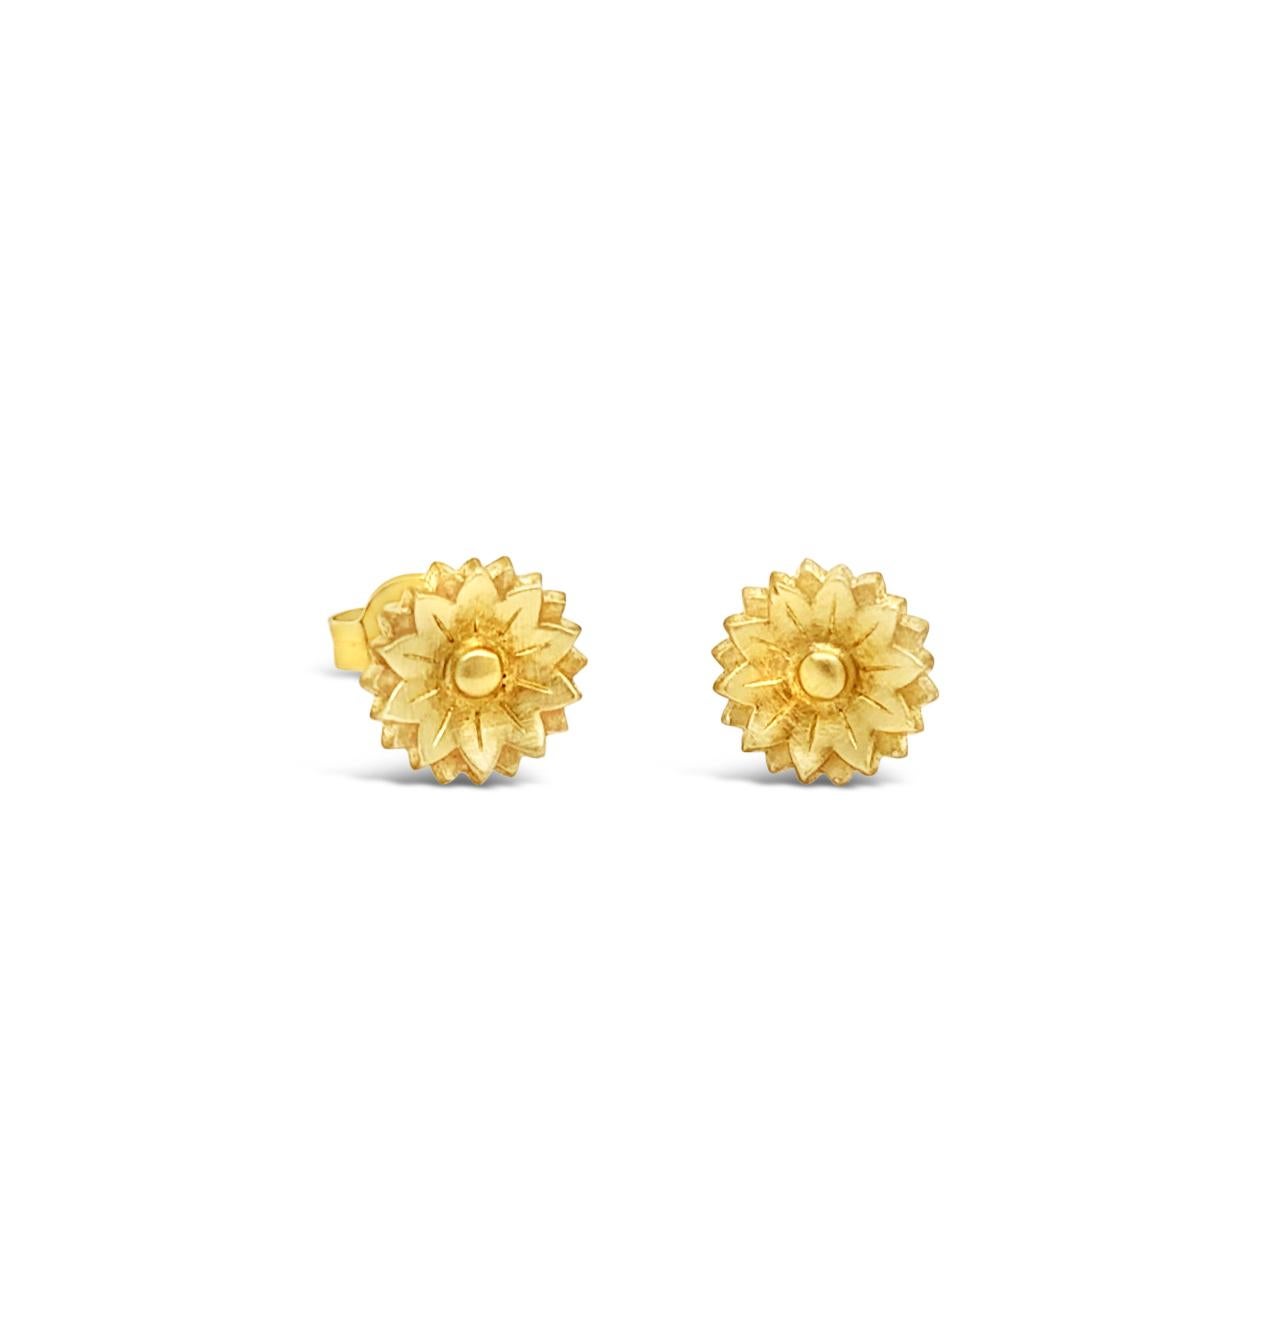 These cute 18ct yellow gold 